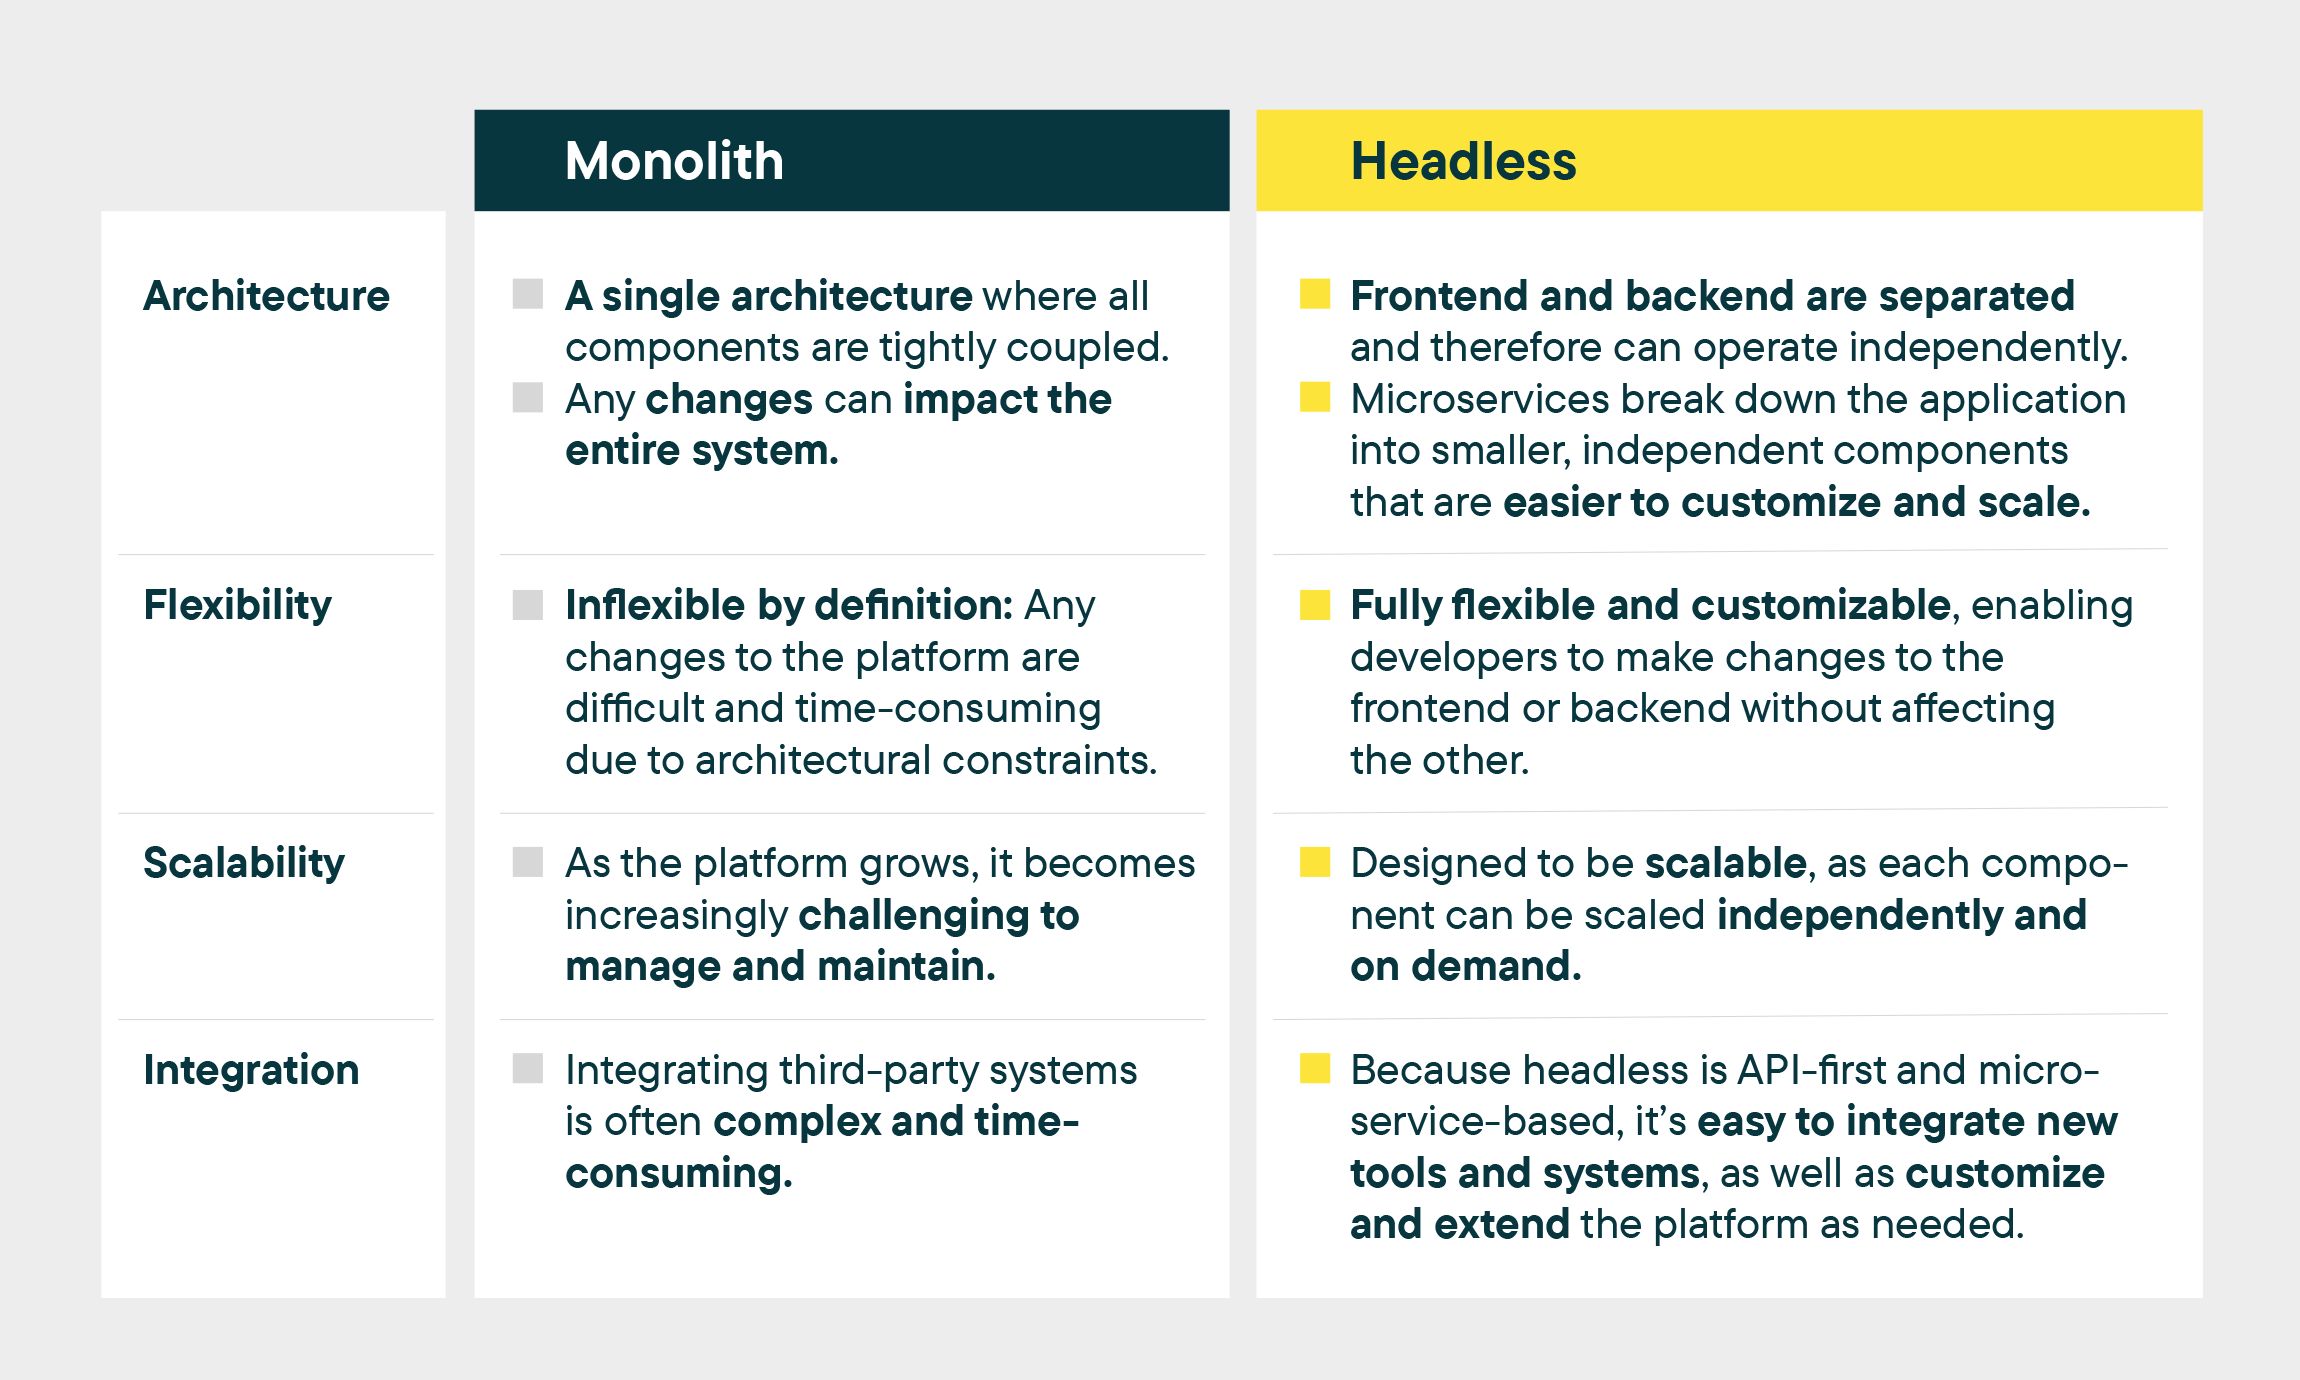 How headless commerce and monolithic platforms compare in detail